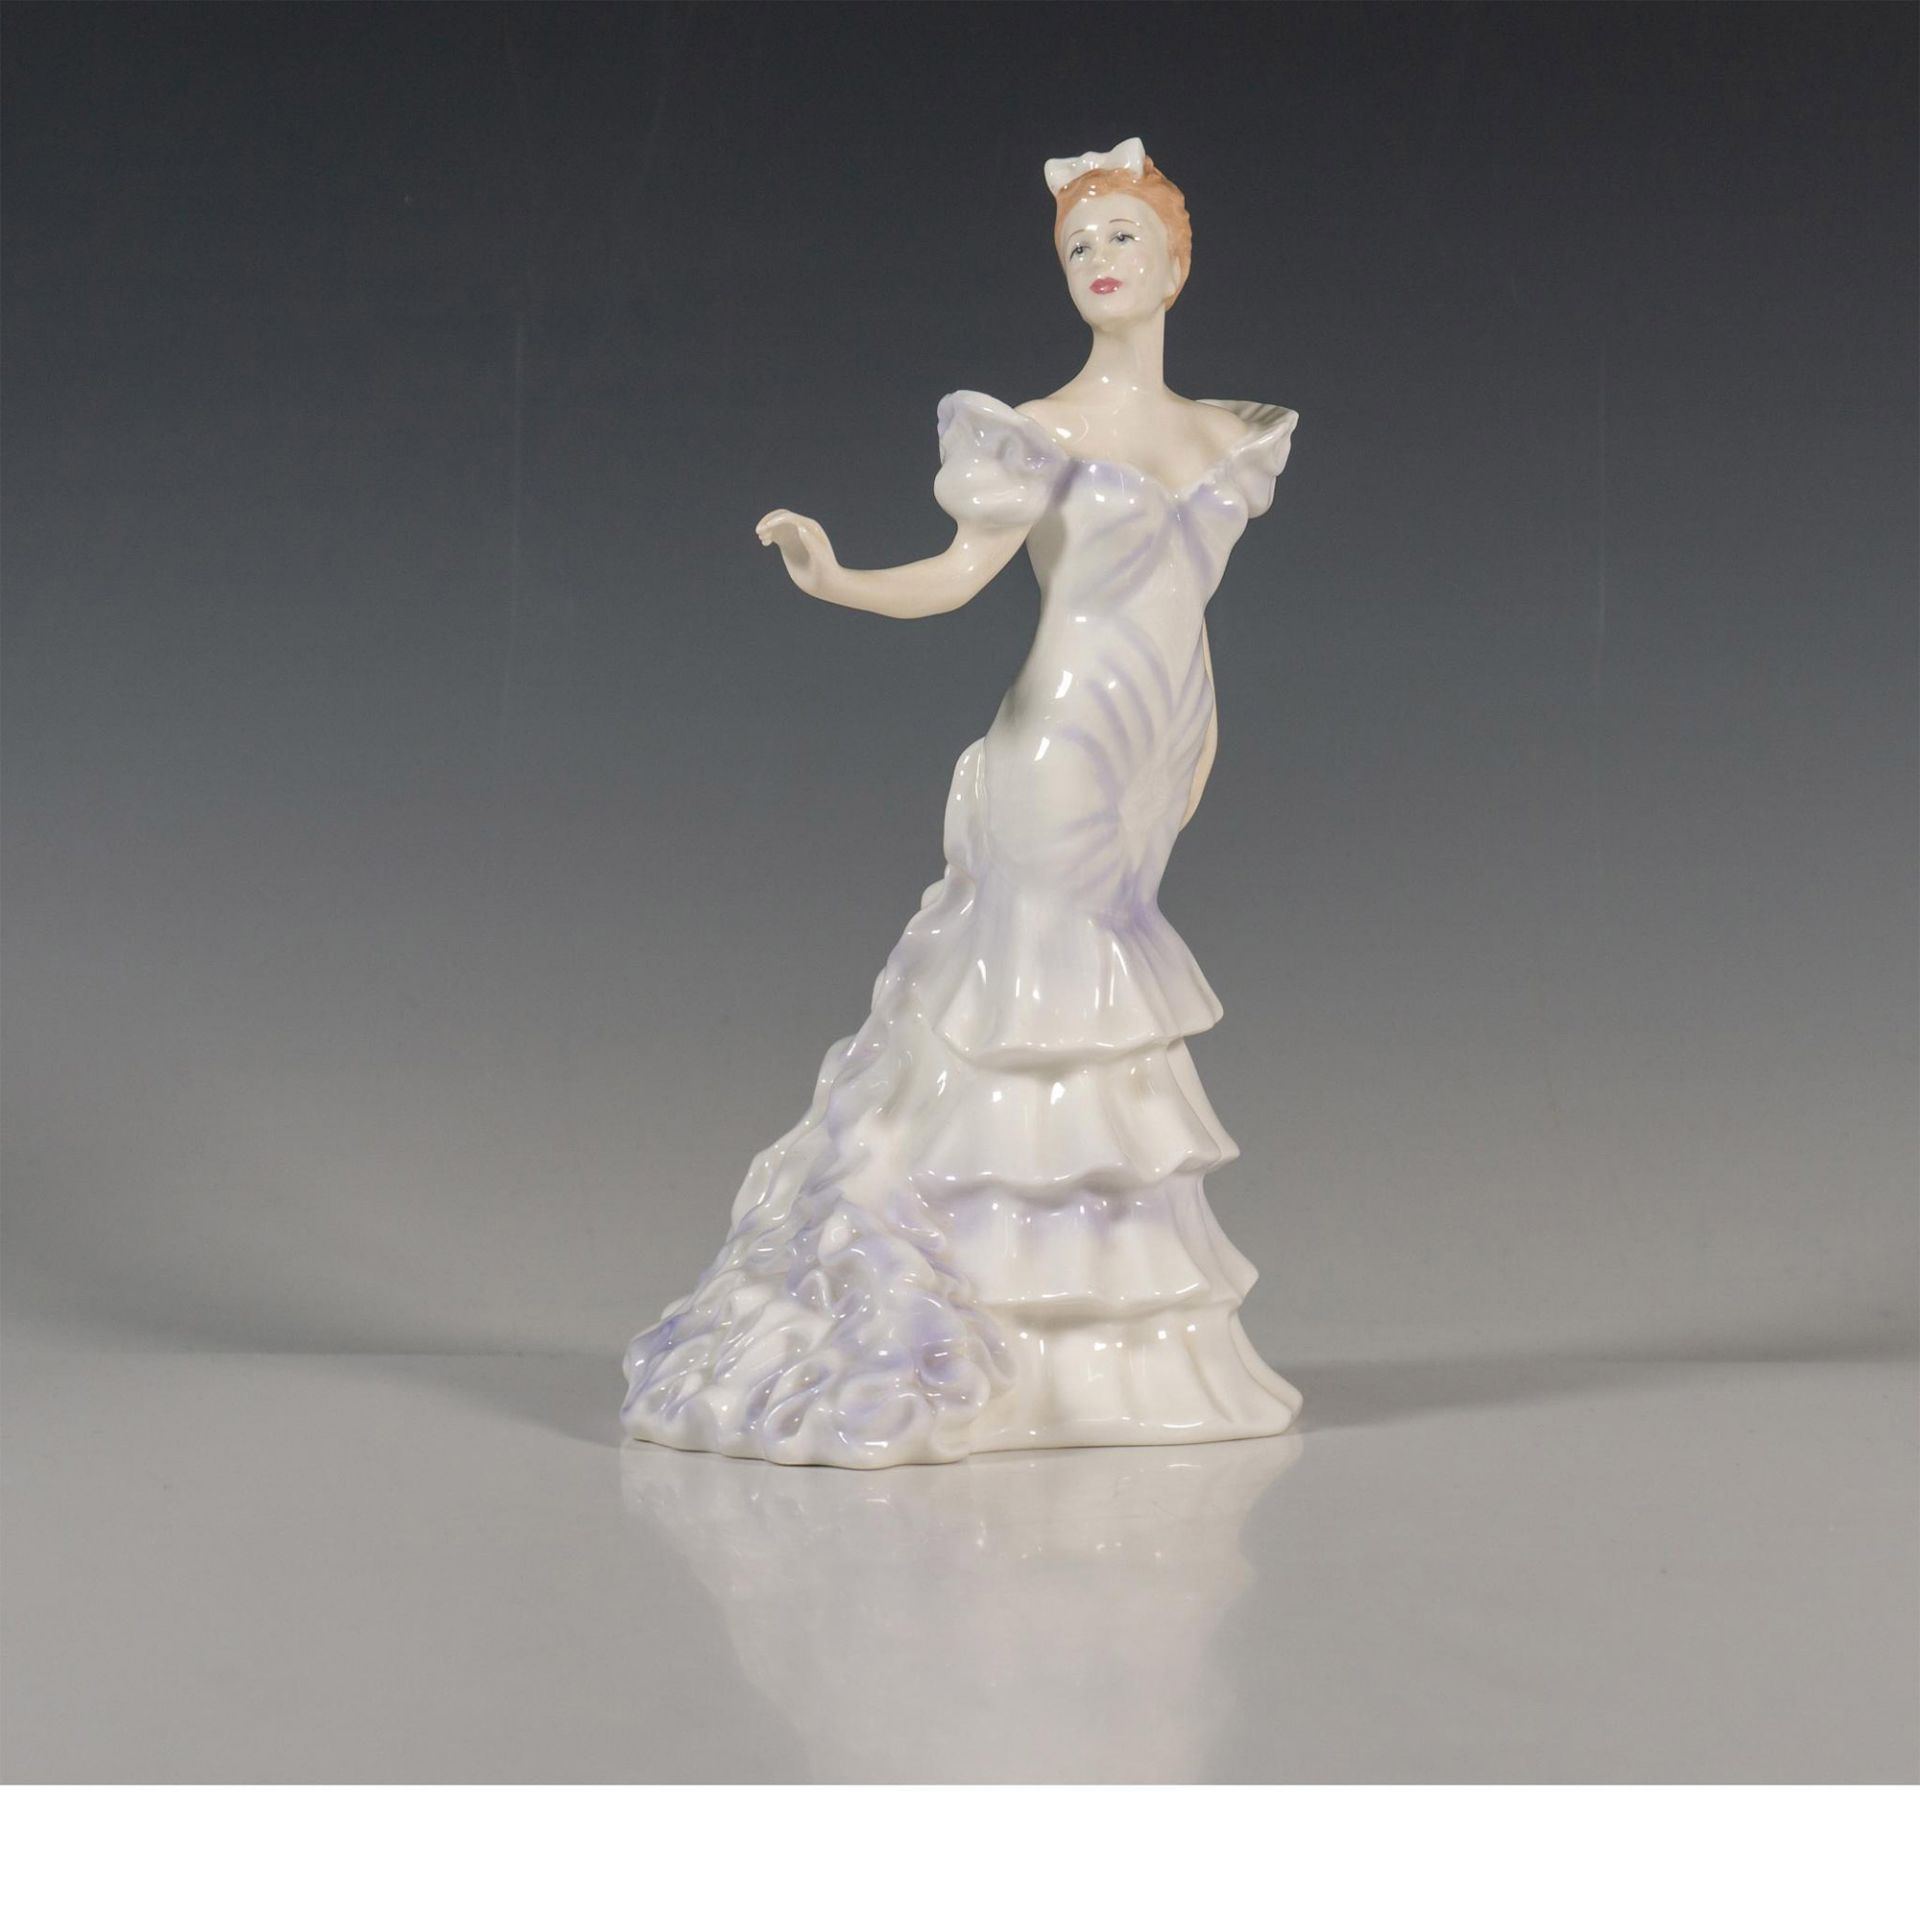 Centre Stage HN3861 Colorway - Royal Doulton Figurine